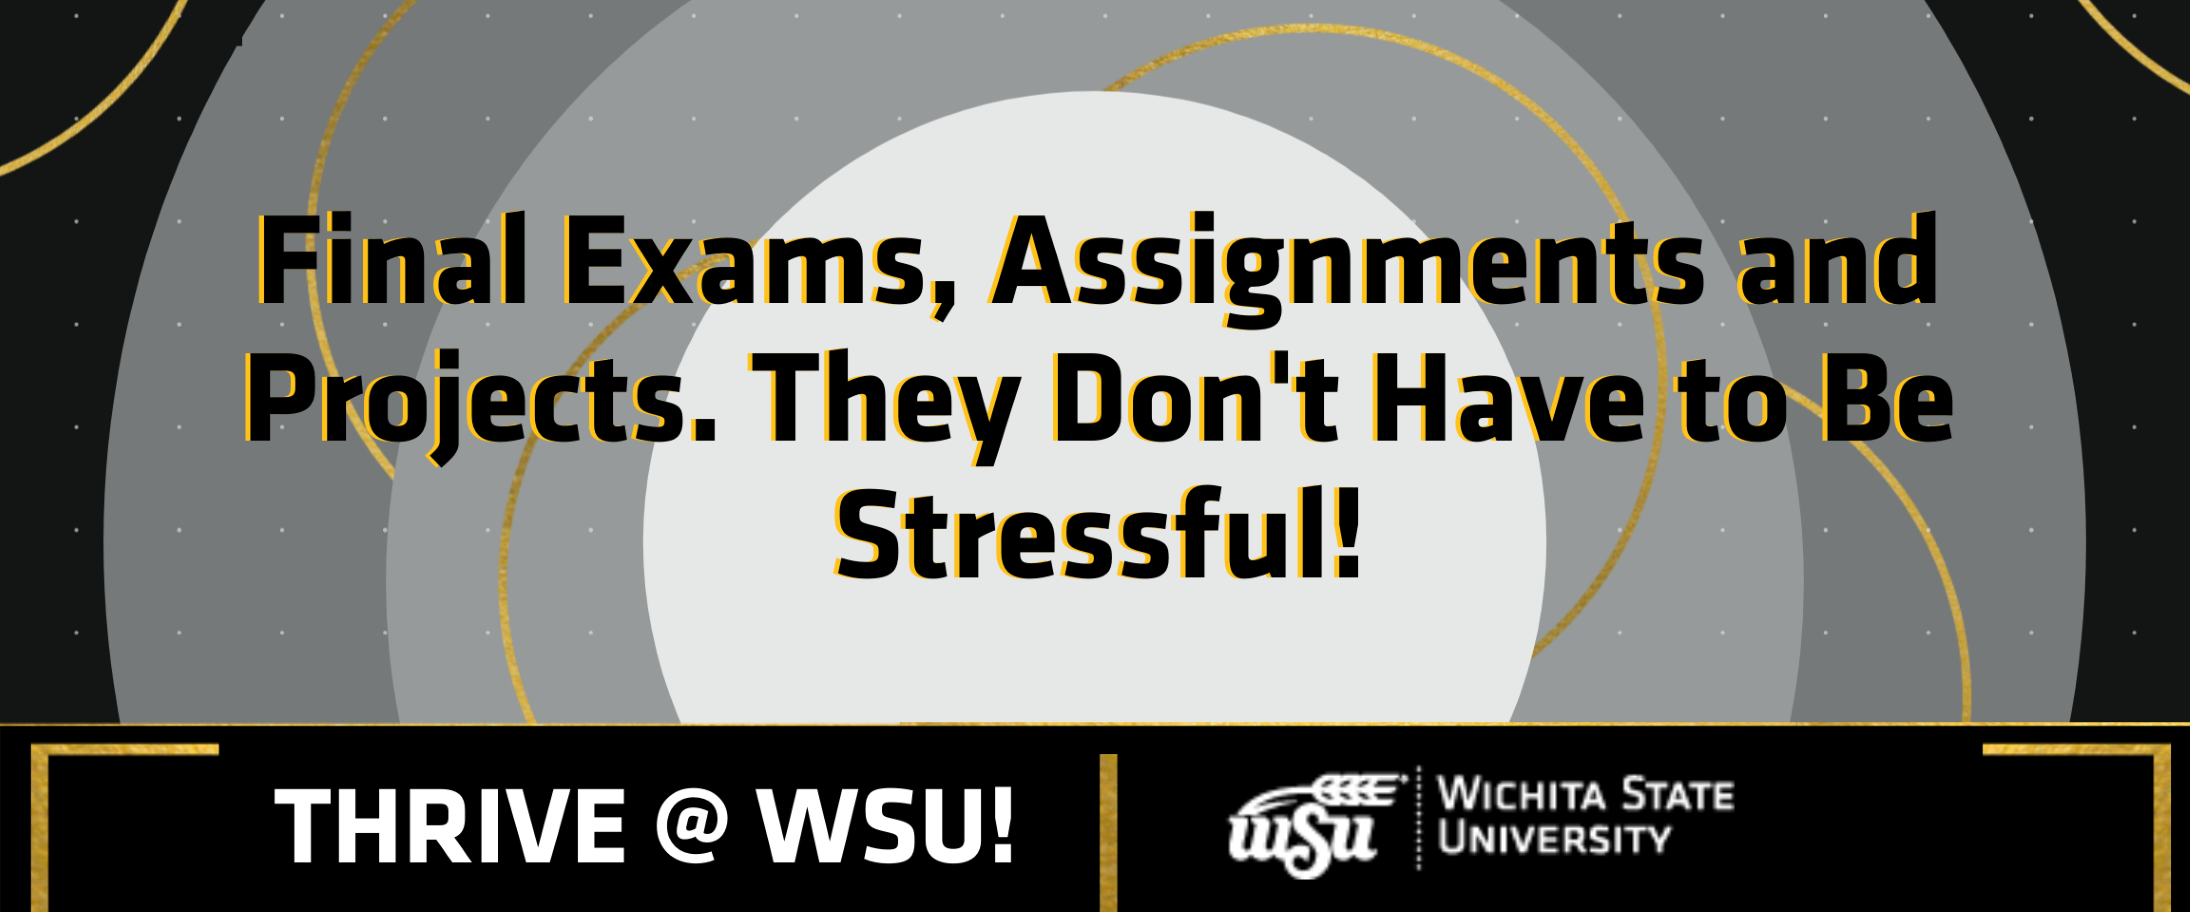 Fina Exams, Assignments and Projects. They Don't Have to Be Stressful!